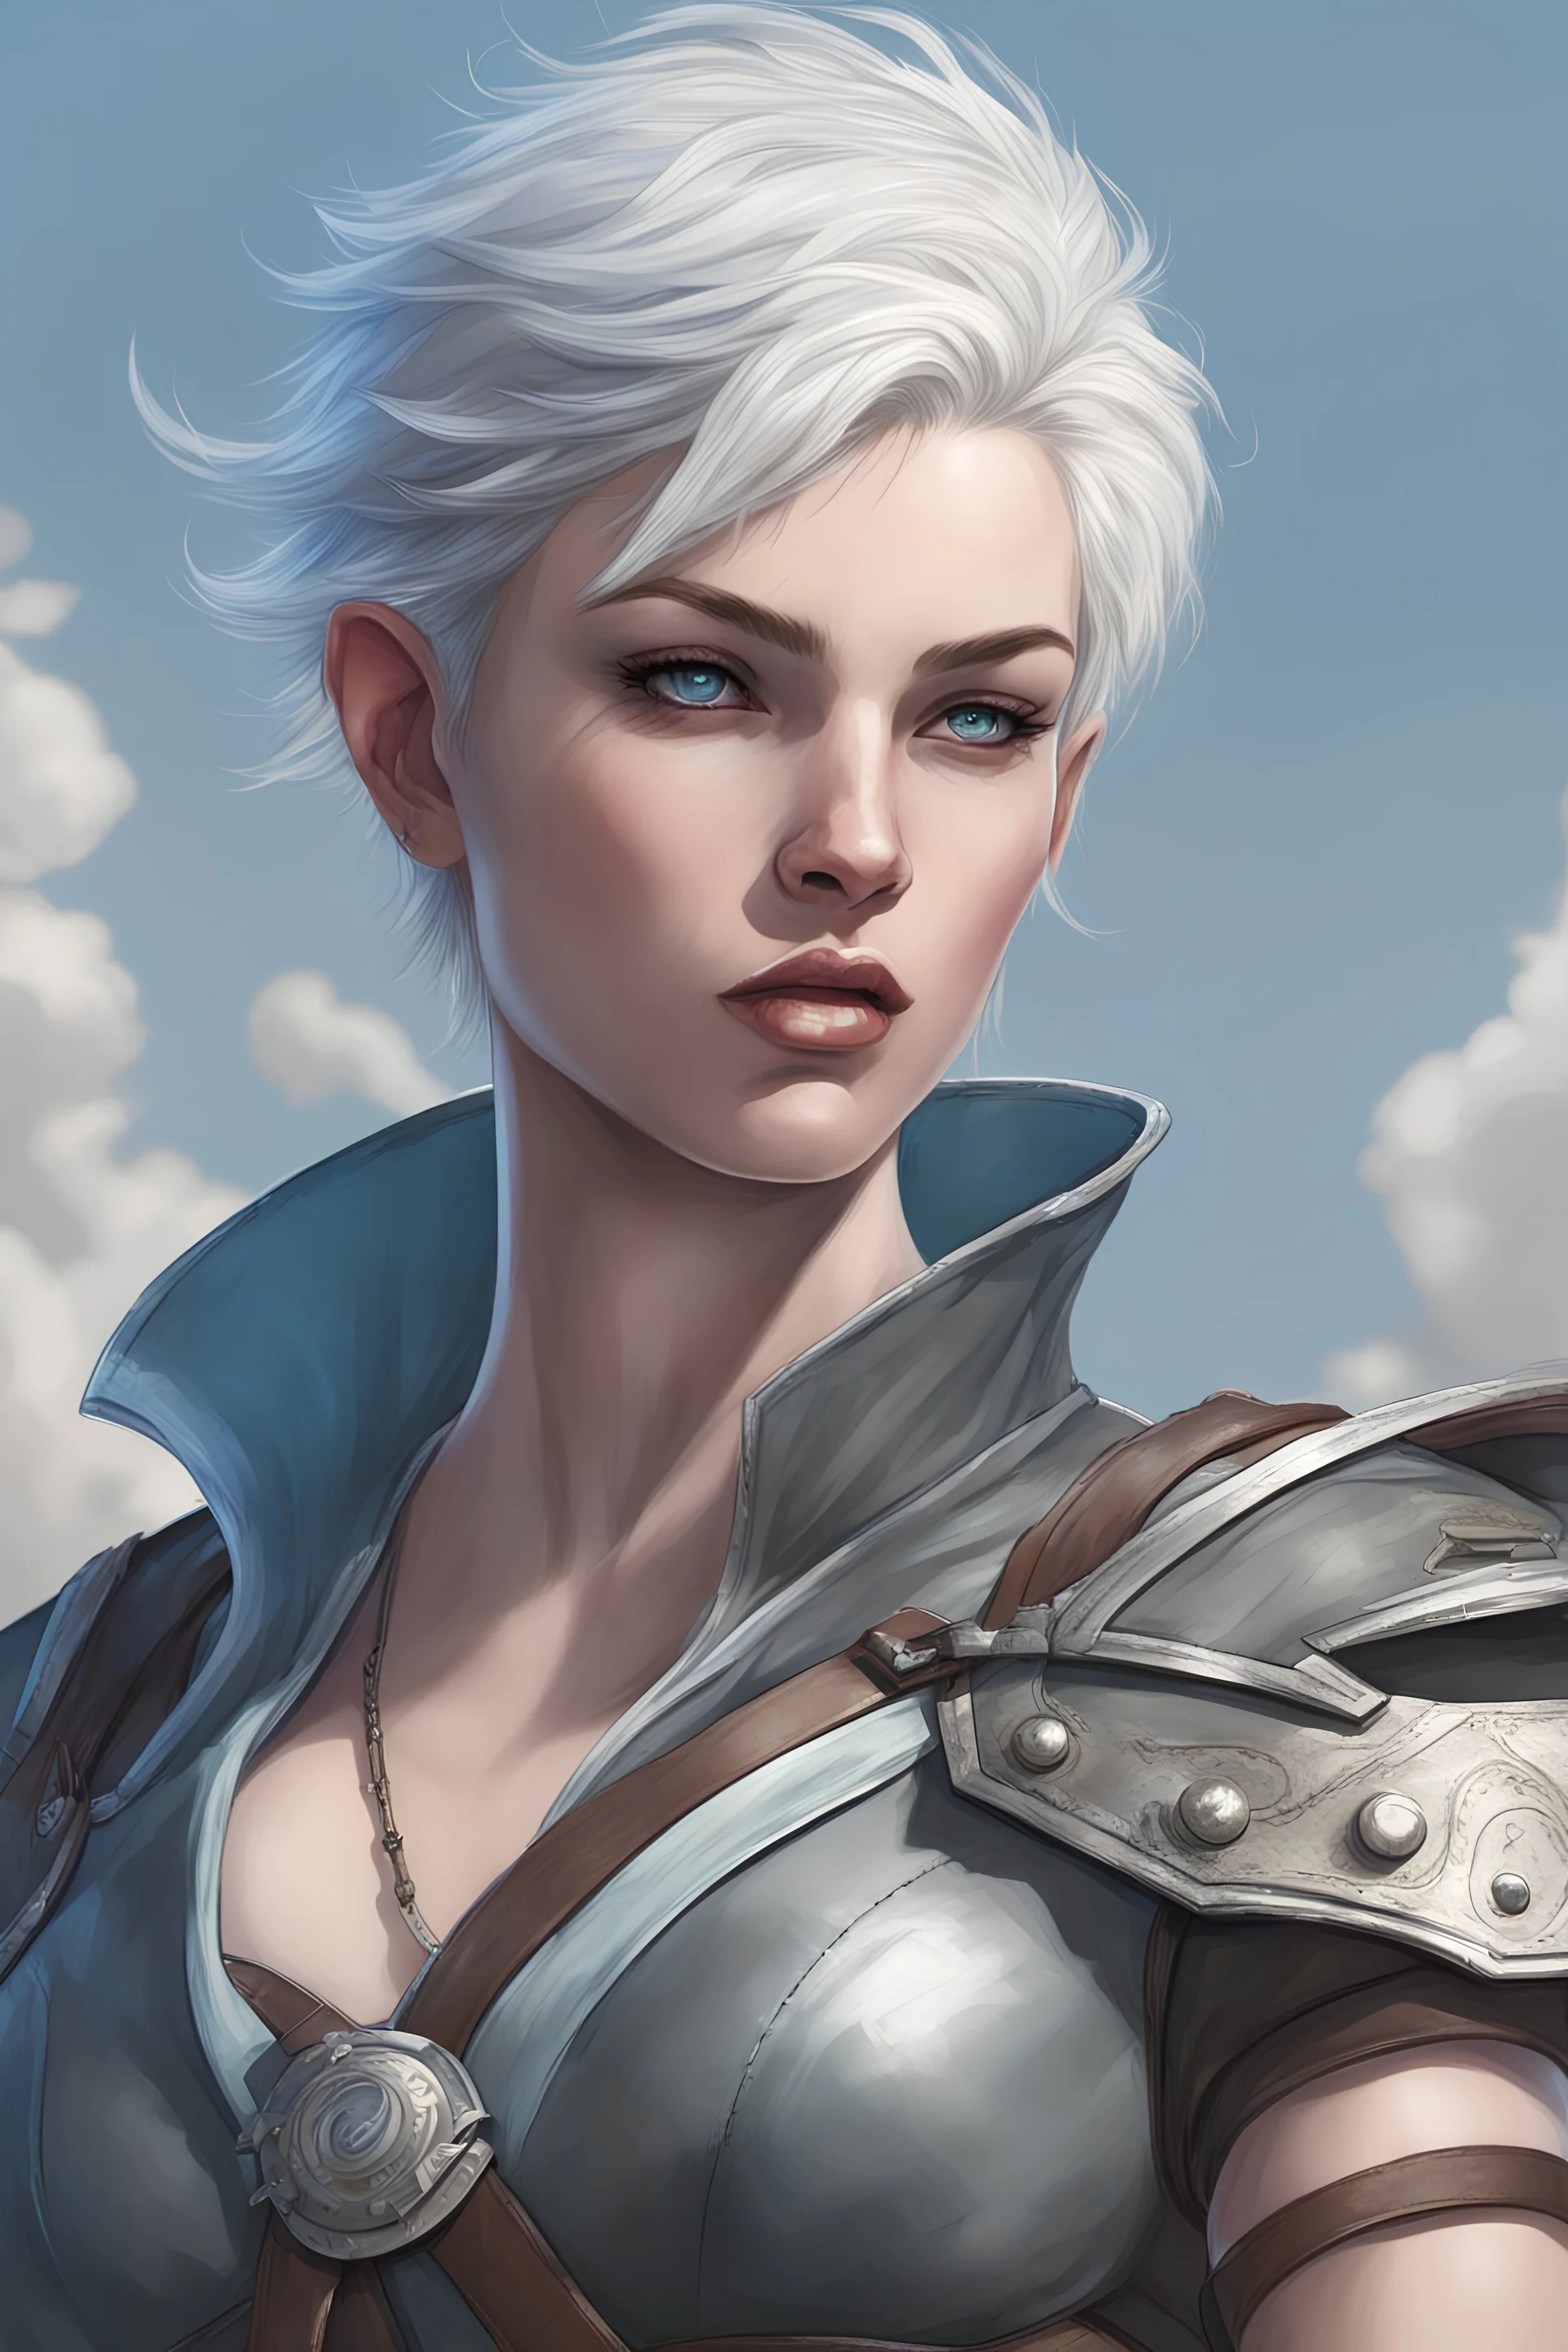 create a young female air genasi from dungeons and dragons, white short hair, undercut, light blue eyes, wind like hair, wearing hot leather clothing that also looks studded, she is smoking, realistic, digital art, high resolution, strong lighting